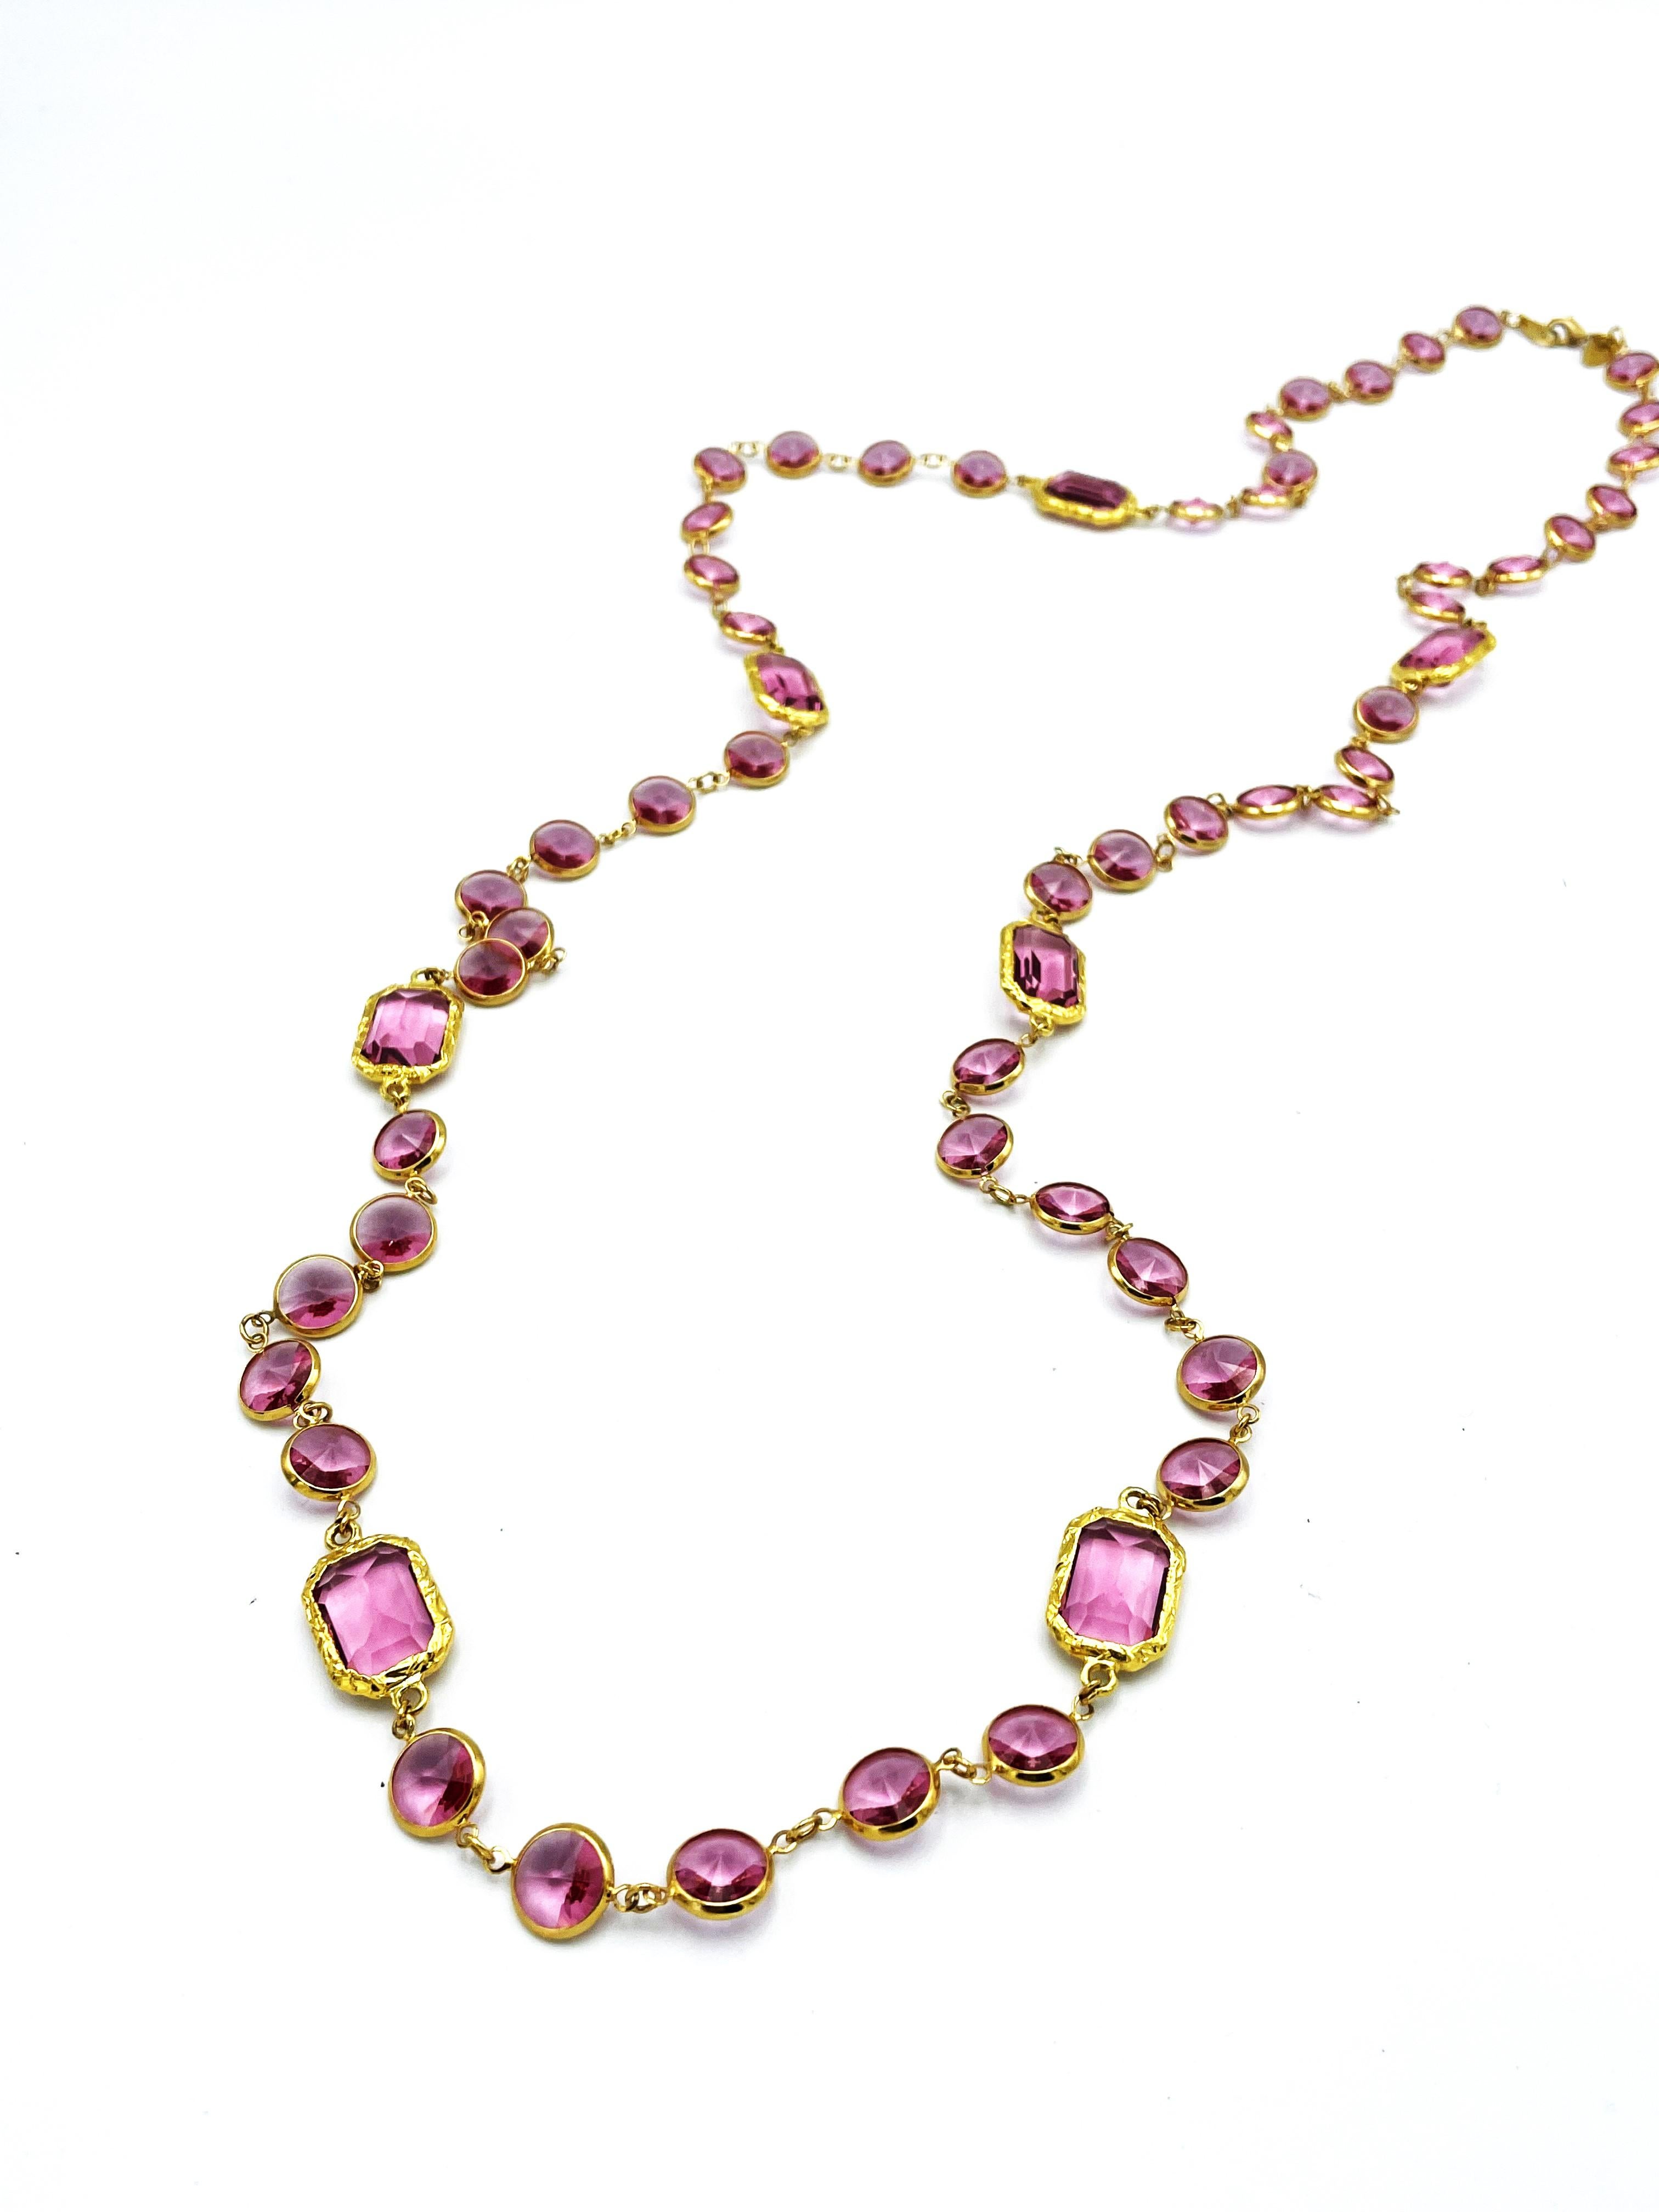  A long and newly made Chanel Chicklet necklace made of pink Swarovski crystals. The necklace/Sautoir has 7 square cut chicklets, like the original Chanel Sautoir, only the cut rectangular stones are slightly smaller, signed 'pomp art' . Between the